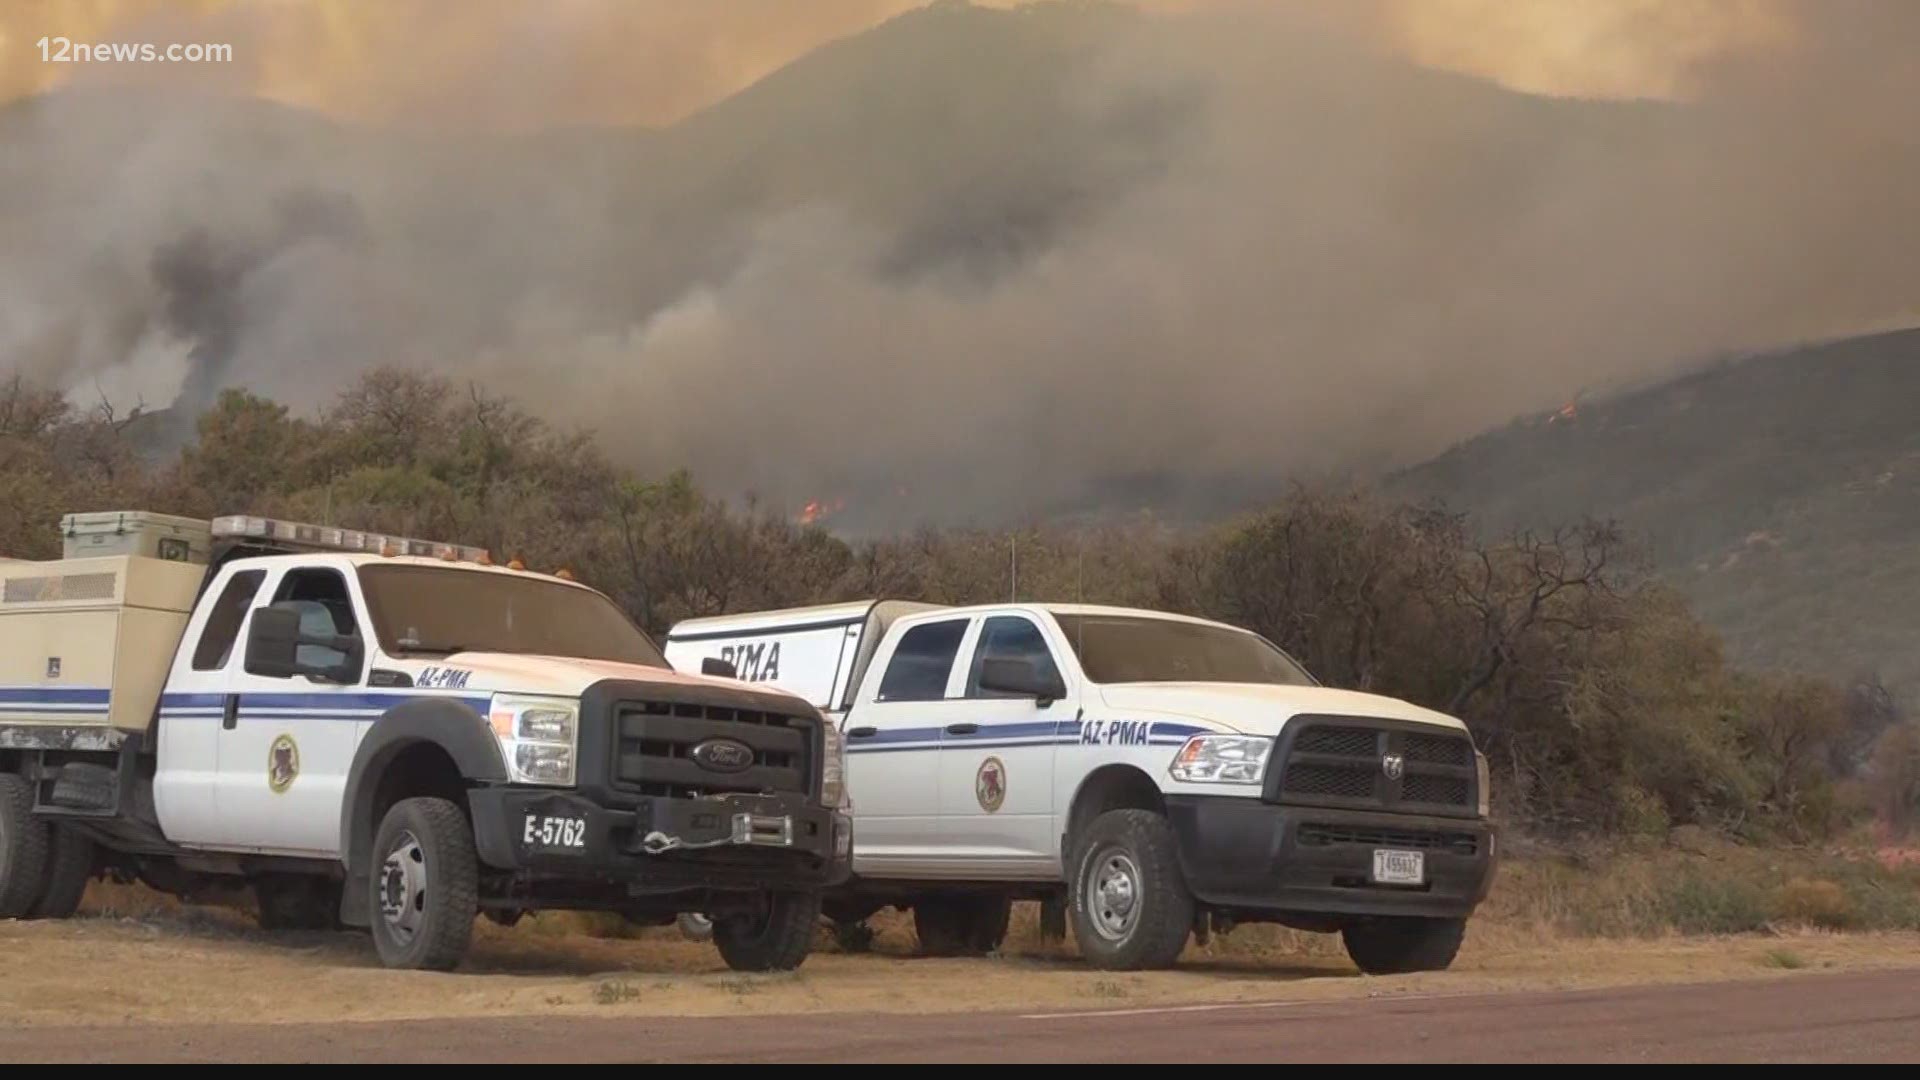 The current fire conditions in Arizona are terrible. Here's a look back at the history of wildfires in the state.